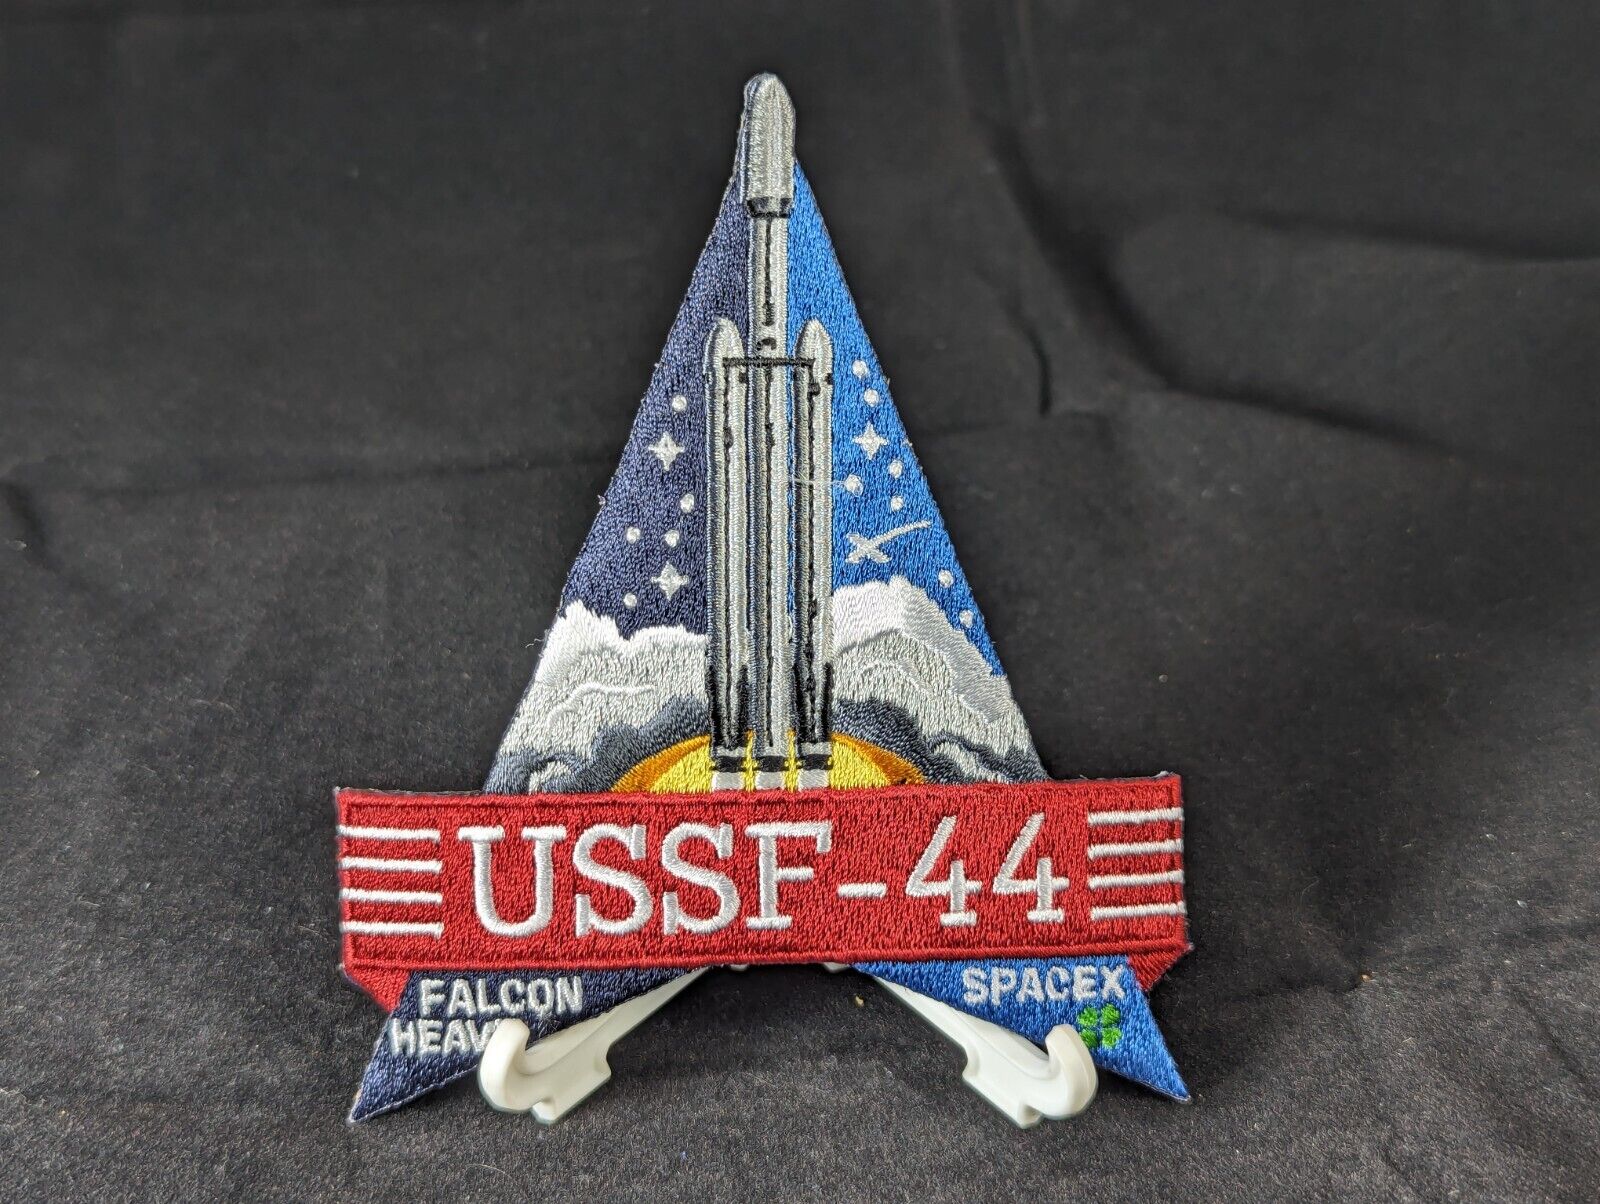 SpaceX Employee Exclusive Falcon Heavy USSF-44 Patch